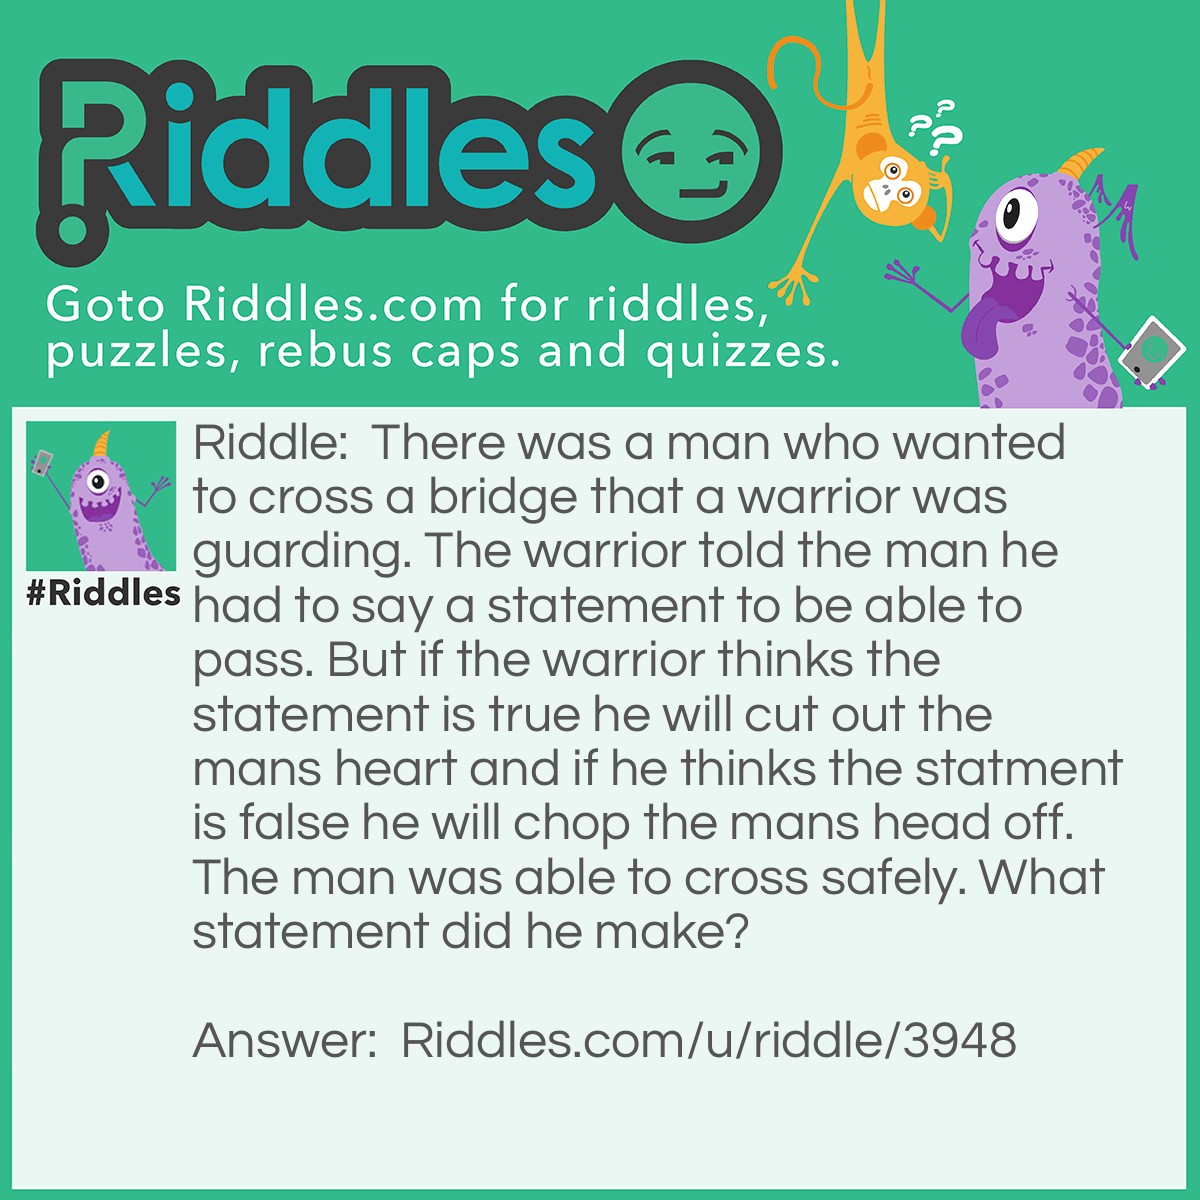 Riddle: There was a man who wanted to cross a bridge that a warrior was guarding. The warrior told the man he had to say a statement to be able to pass. But if the warrior thinks the statement is true he will cut out the mans heart and if he thinks the statment is false he will chop the mans head off. The man was able to cross safely. What statement did he make? Answer: The man said to the soldier, "You will chop my head off." Then warrior couldn't say it was false and chop off his head because then it would be true. But if it was true then he would have to cut out his heart which would be false.